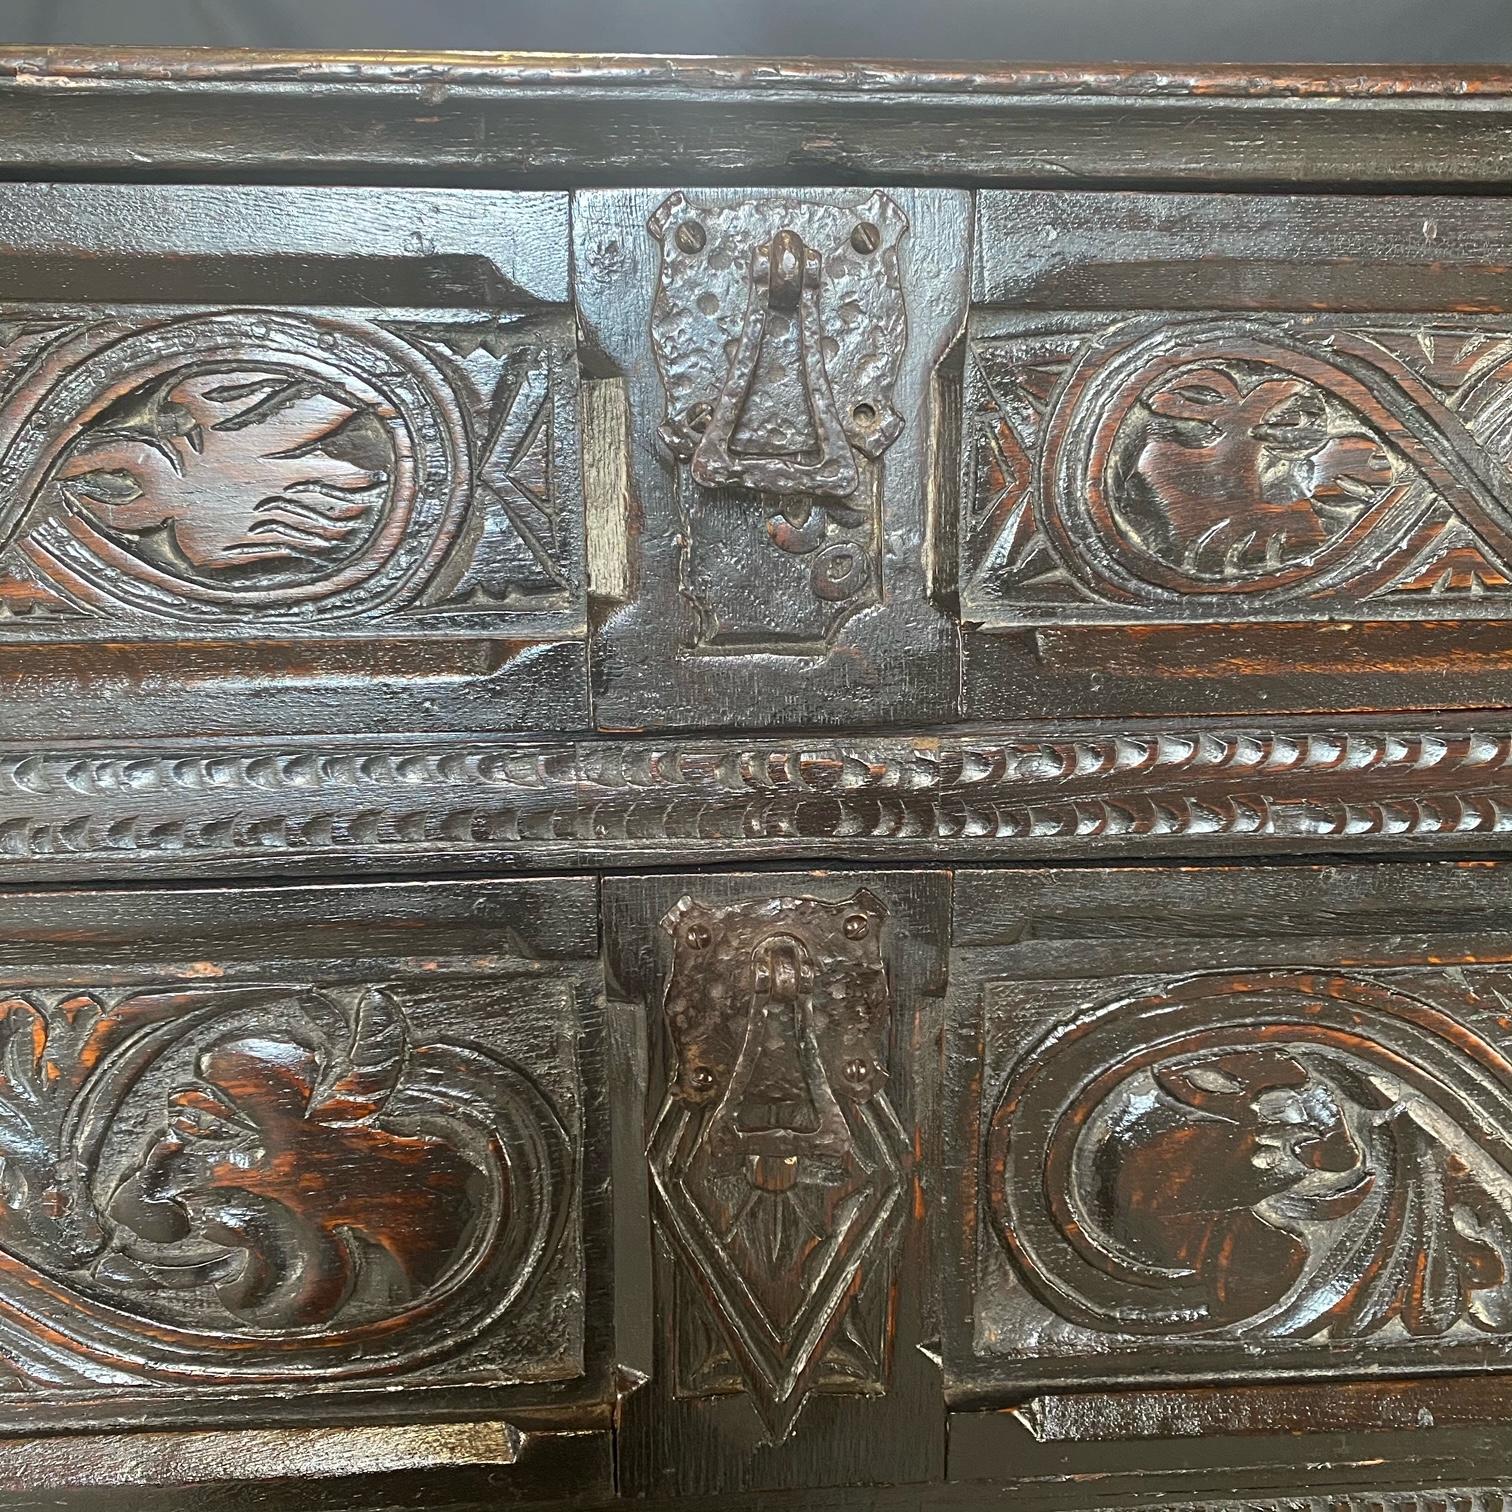 Rare and early 18th century intricately carved oak chest of drawers or commode depicting a story with kings and dragons with a thistle frieze. Bought in Scotland. Paneled sides and two plank back support the beautifully carved front of the chest,